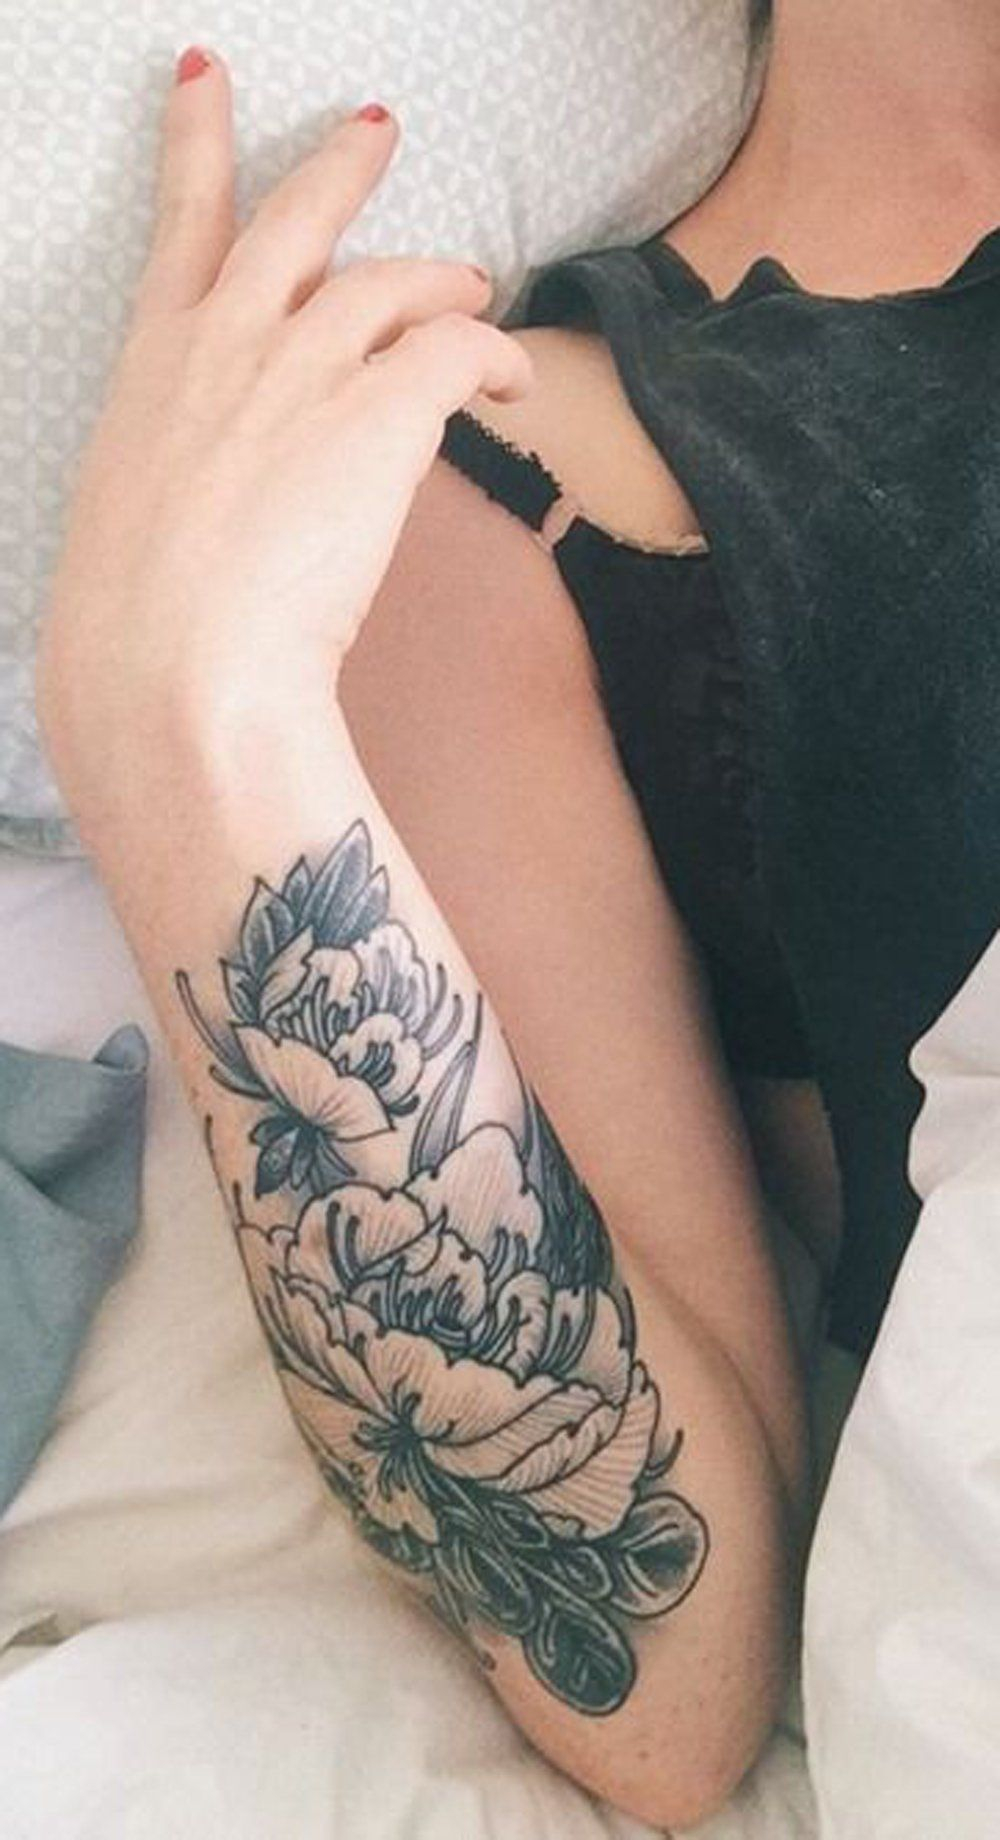 Forearm Wild Flower Black And White Arm Tattoo Ideas For Women within dimensions 1000 X 1840